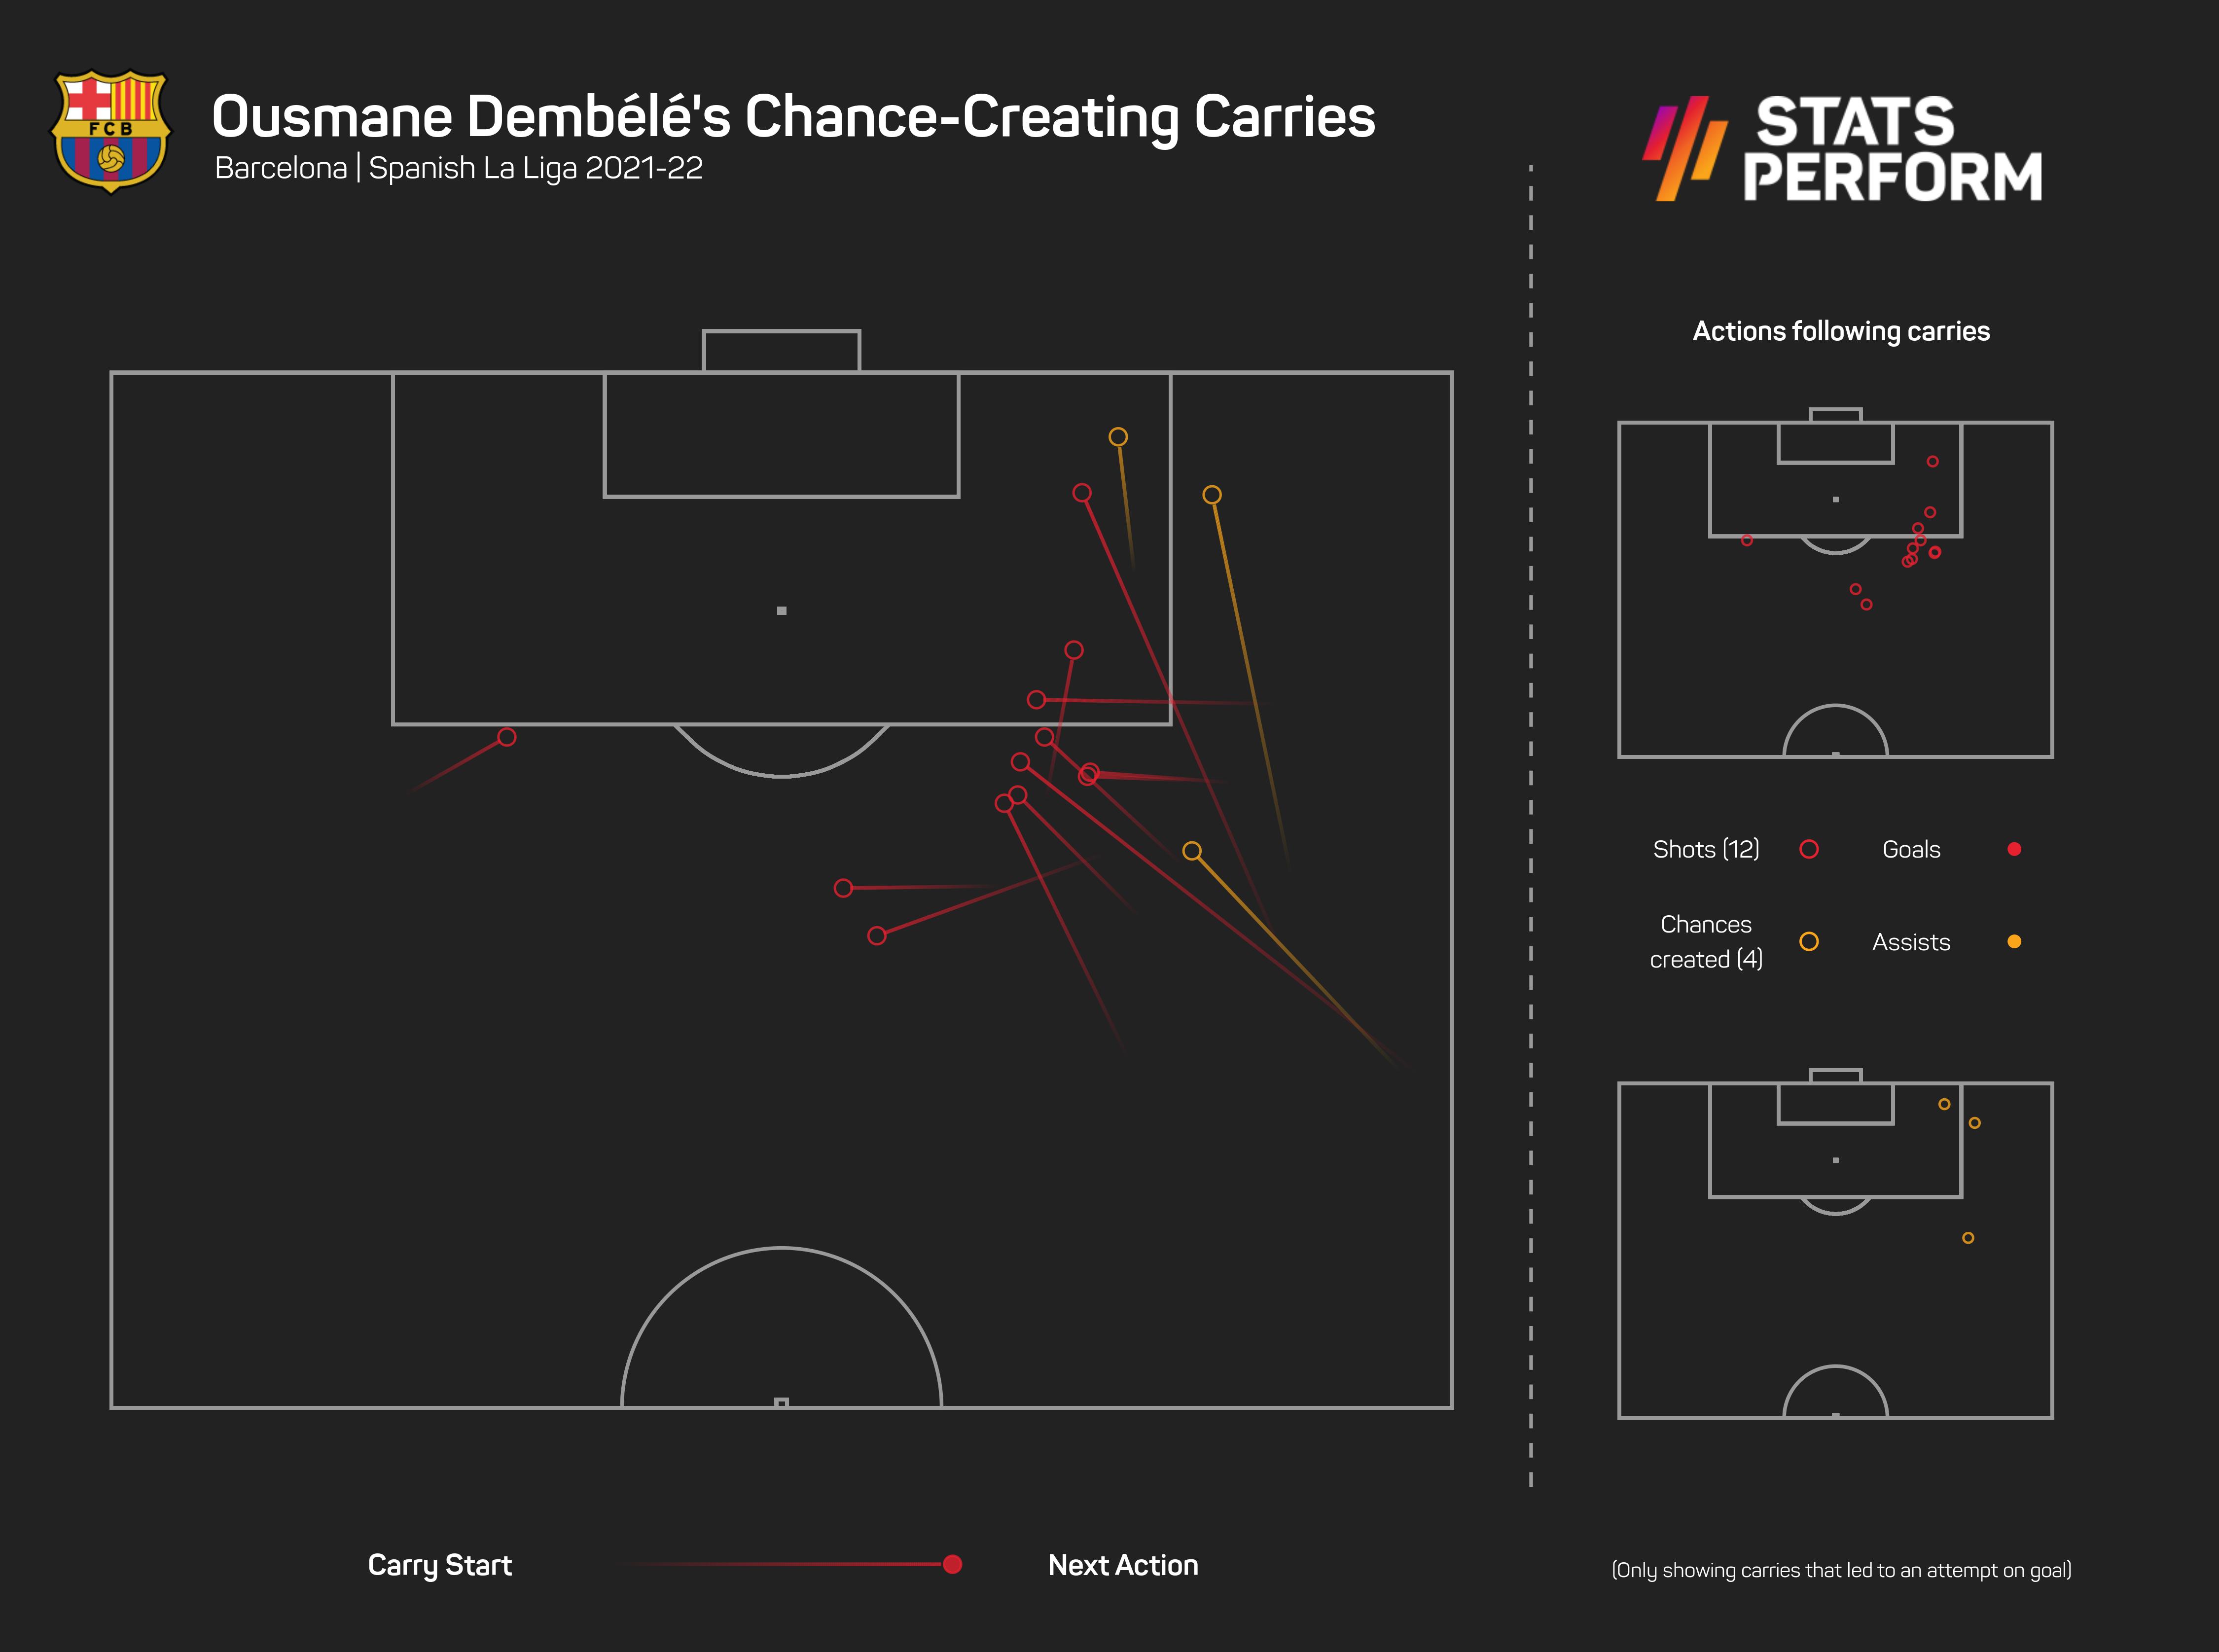 Ousmane Dembele attacking carries in LaLiga 2021-22